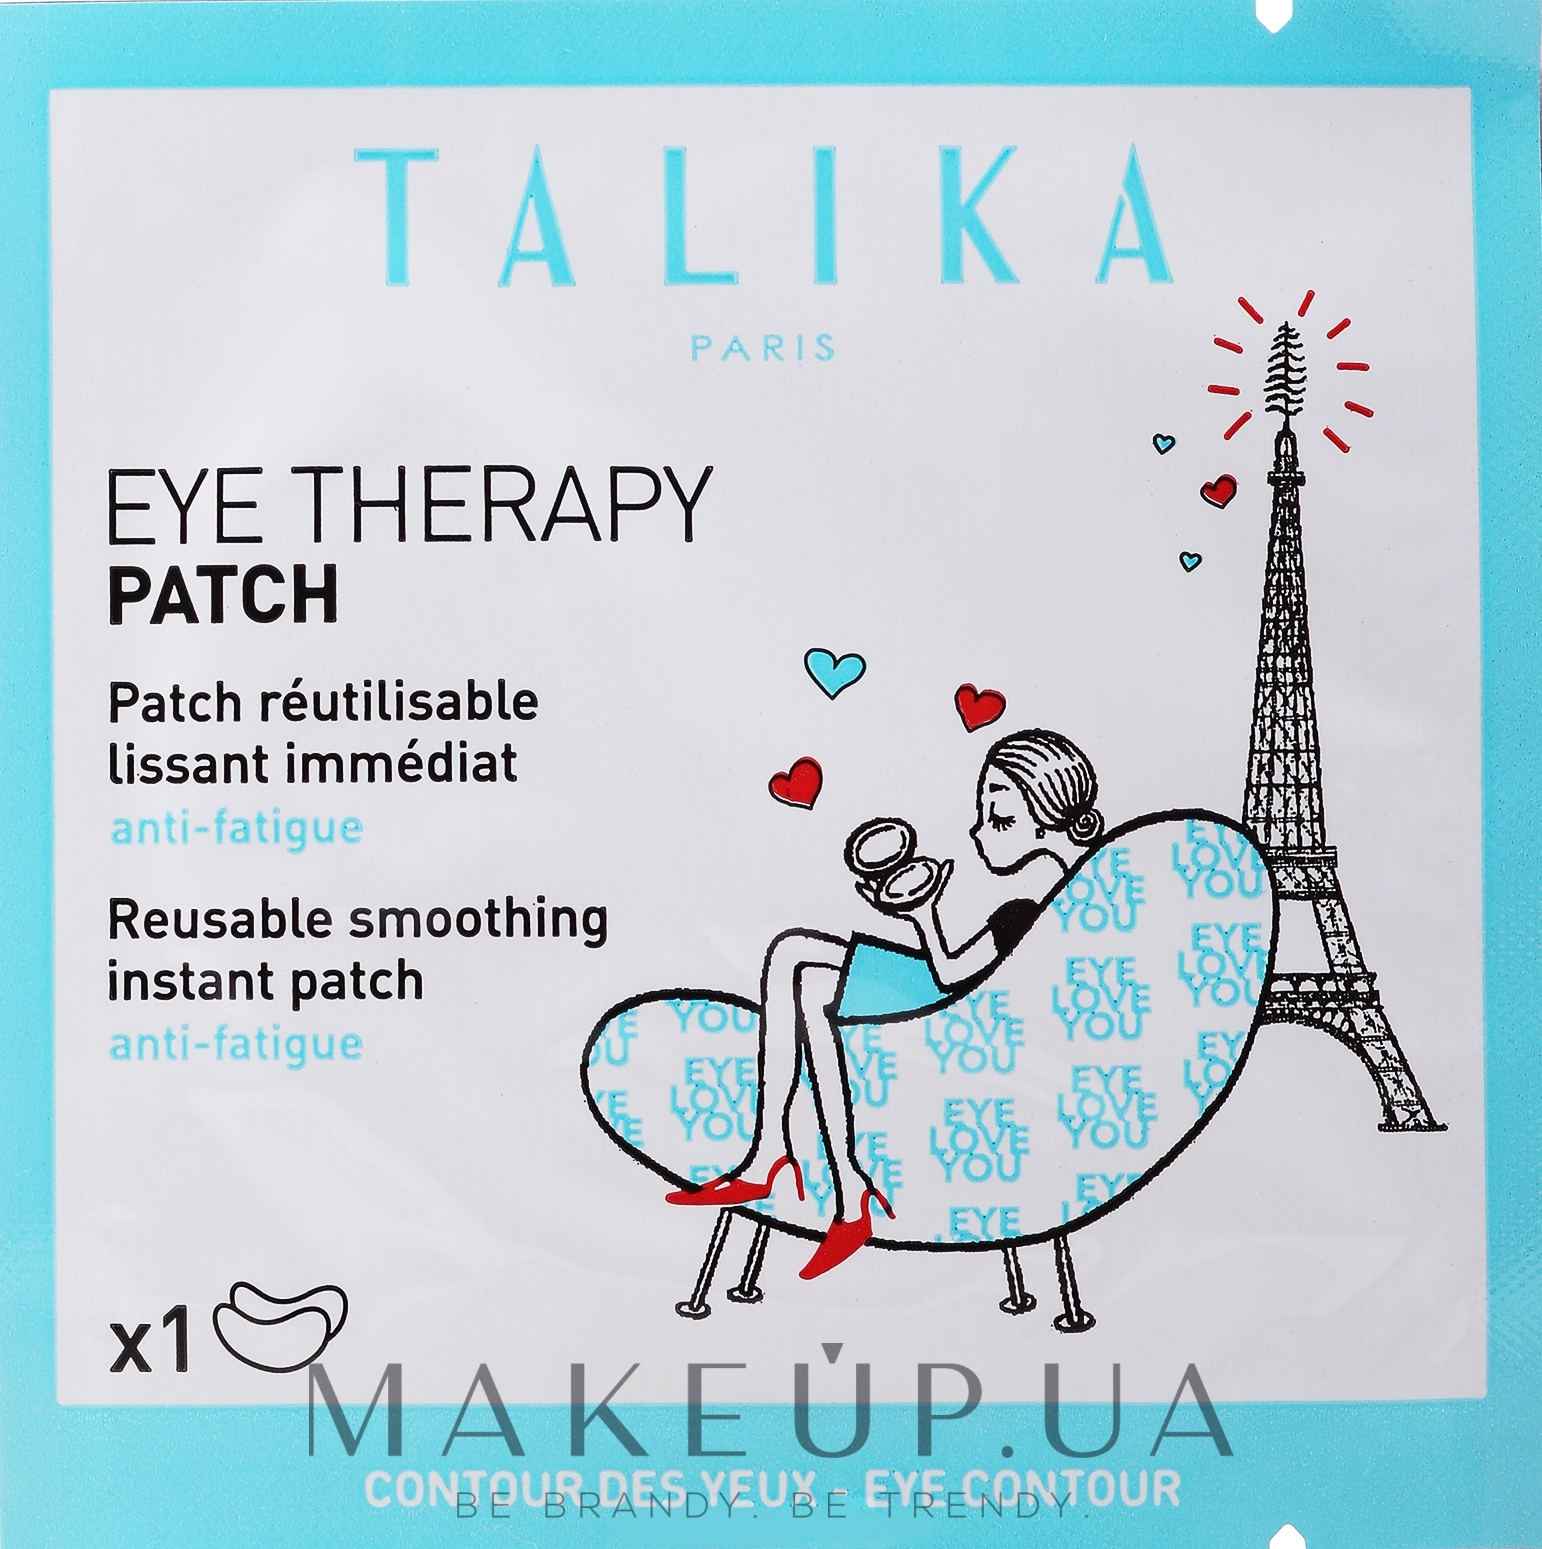 Talika Eye Therapy Reusable Instant Smoothing Patch Refills - Talika Eye Therapy Reusable Instant Smoothing Patch Refills — фото 2шт